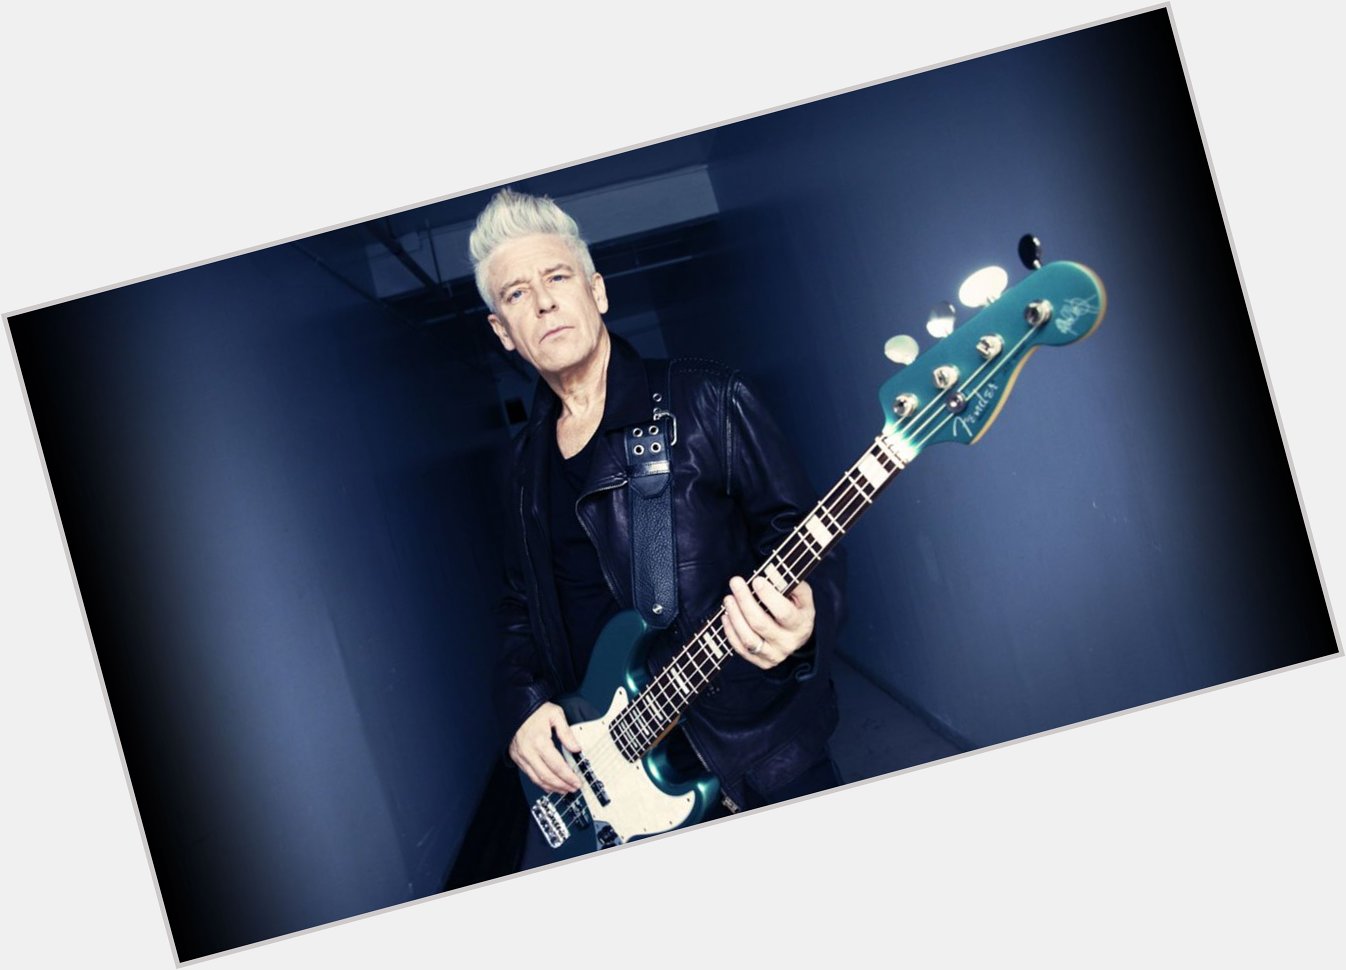 Happy Birthday to bass player and DR Artist Adam Clayton! Adam plays our Sunbeam bass strings. 